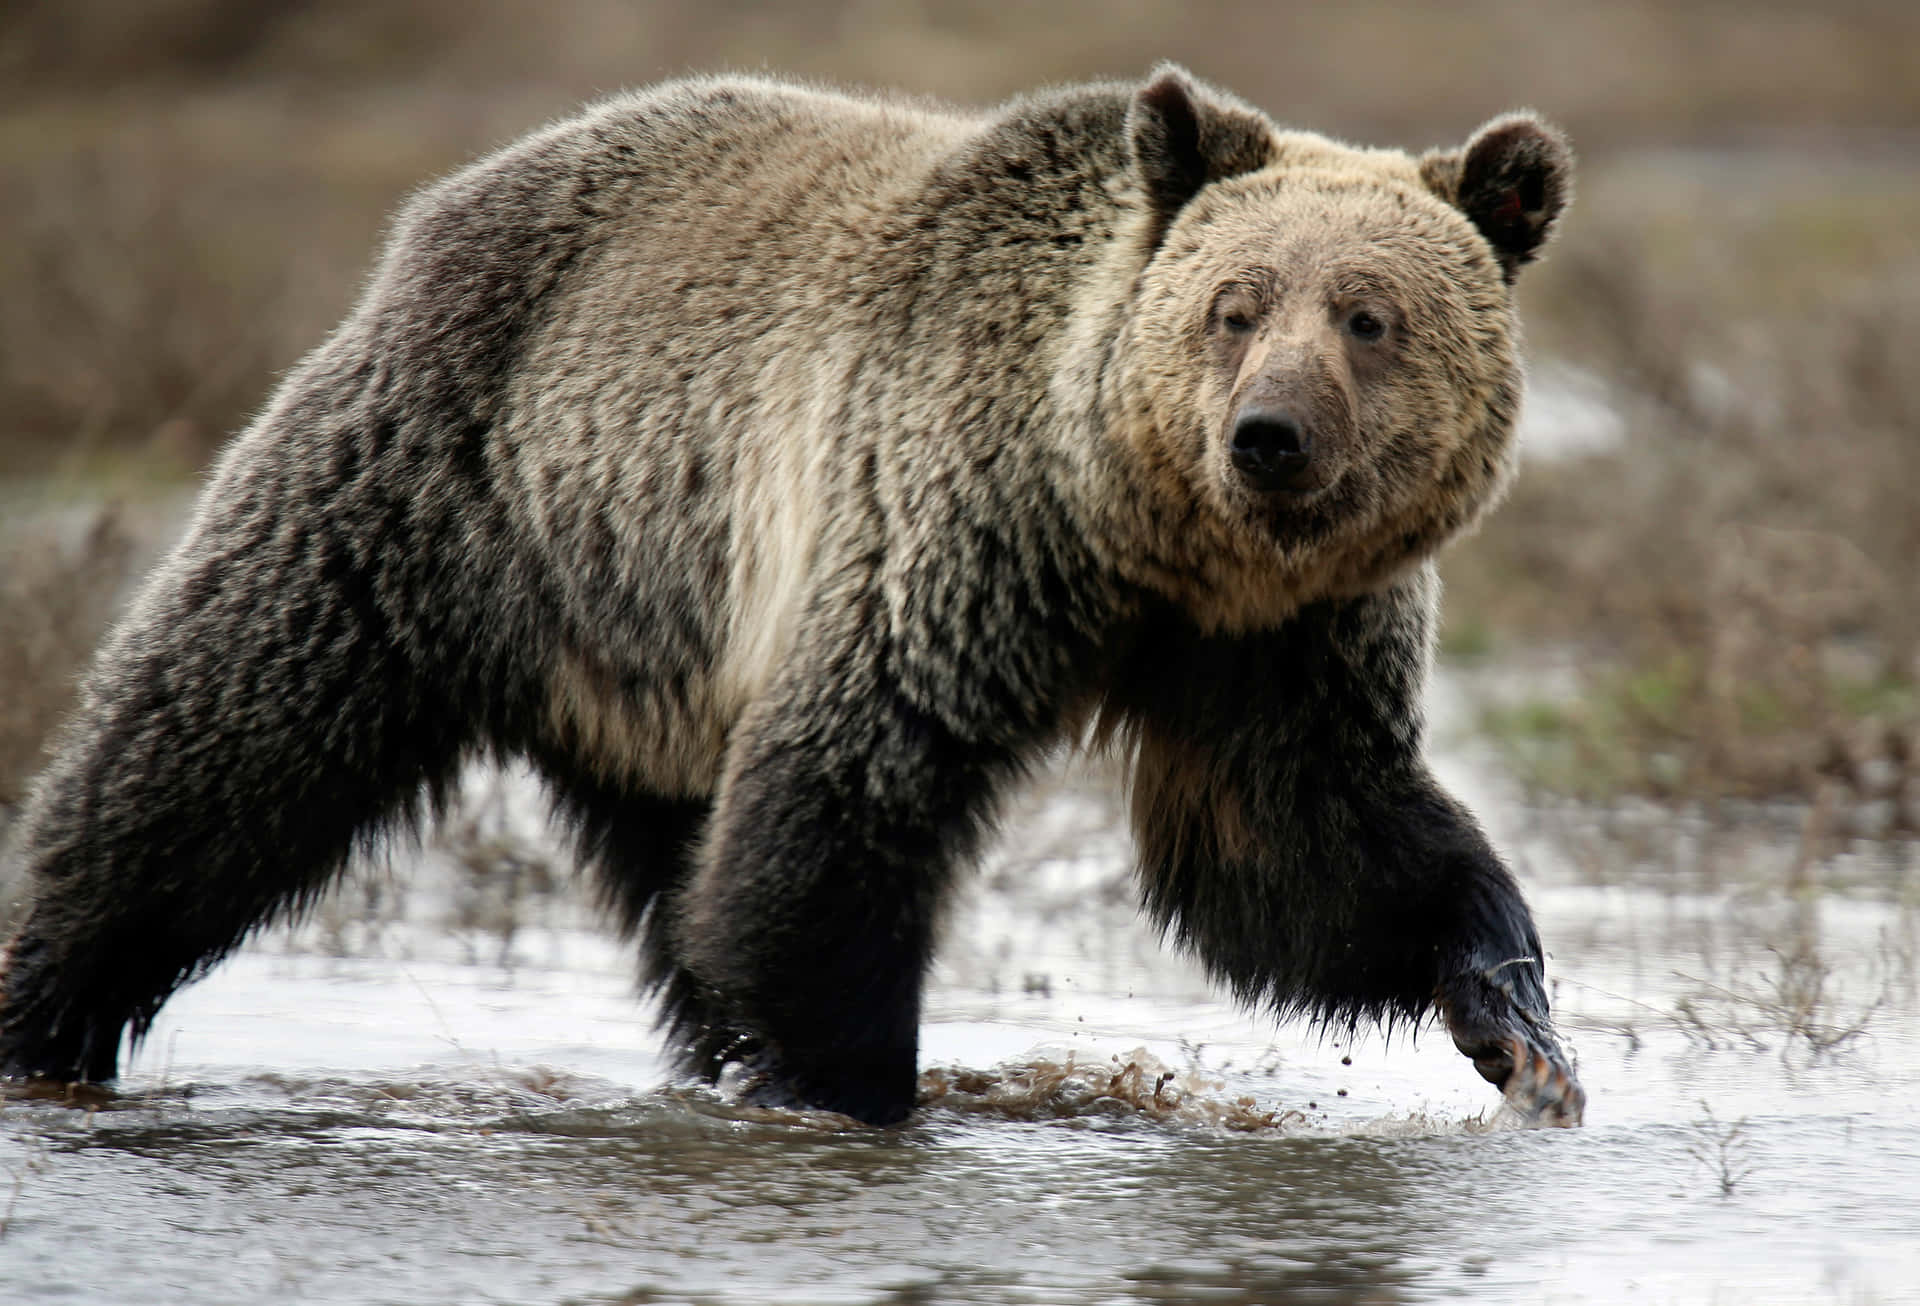 Combined Strength and Agility - A Grizzly Bear